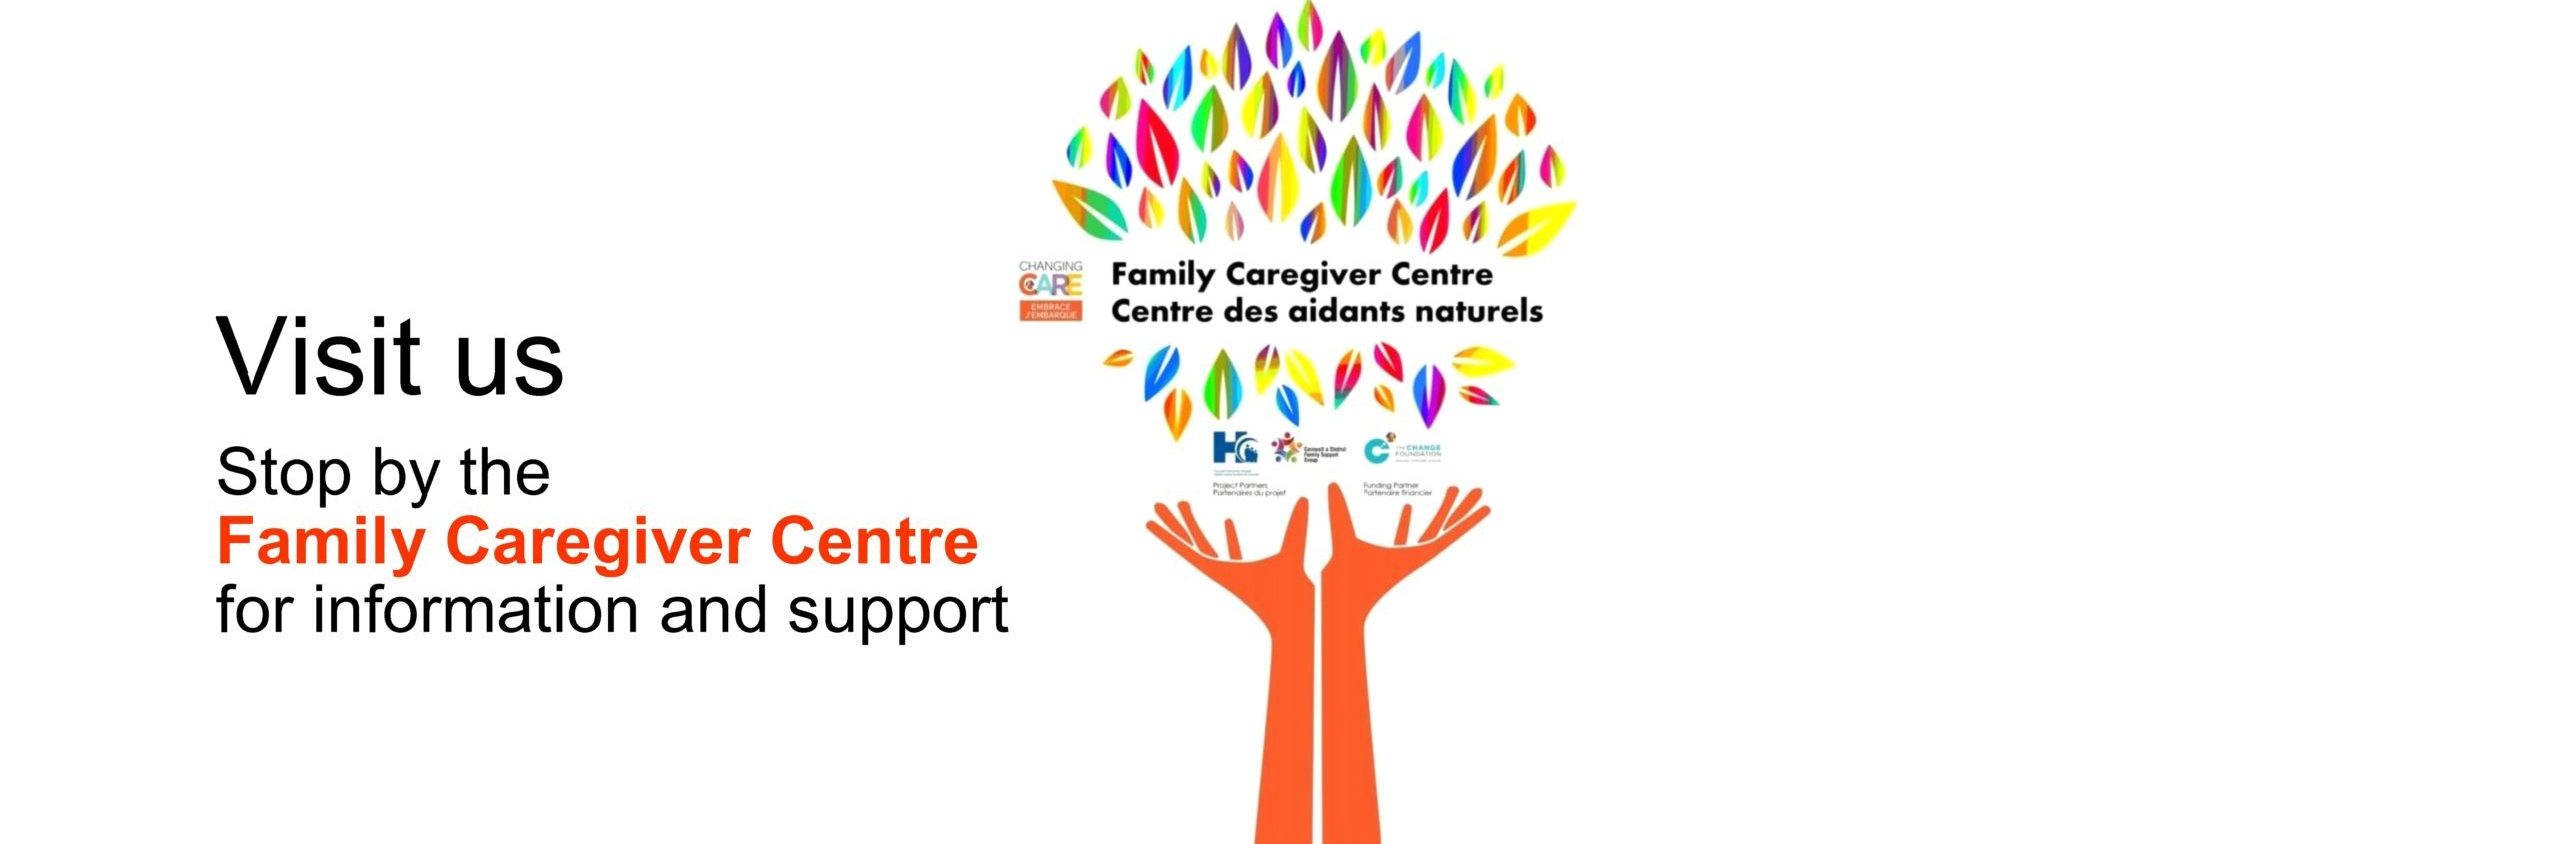 Visit the Family caregiver centre at CCH